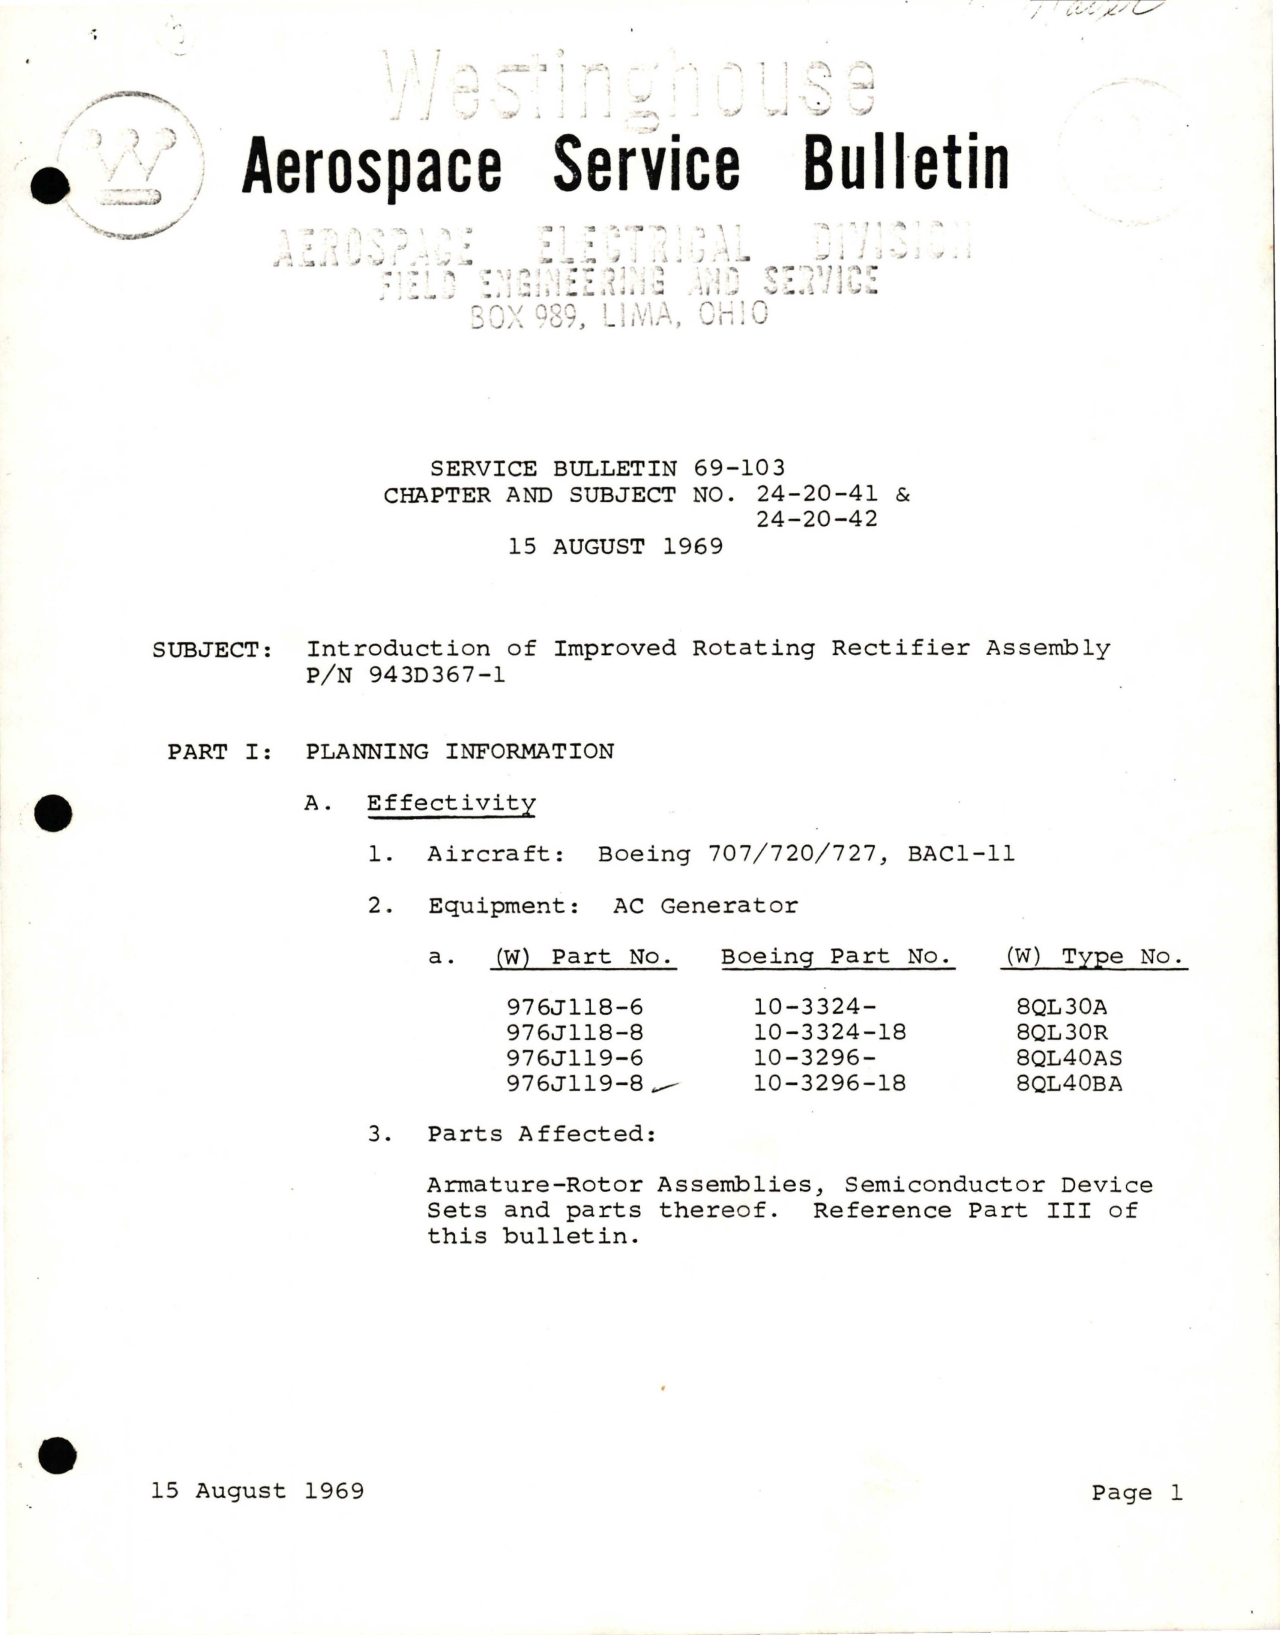 Sample page 1 from AirCorps Library document: Introduction of Improved Rotating Rectifier Assembly - Part 943D367-1